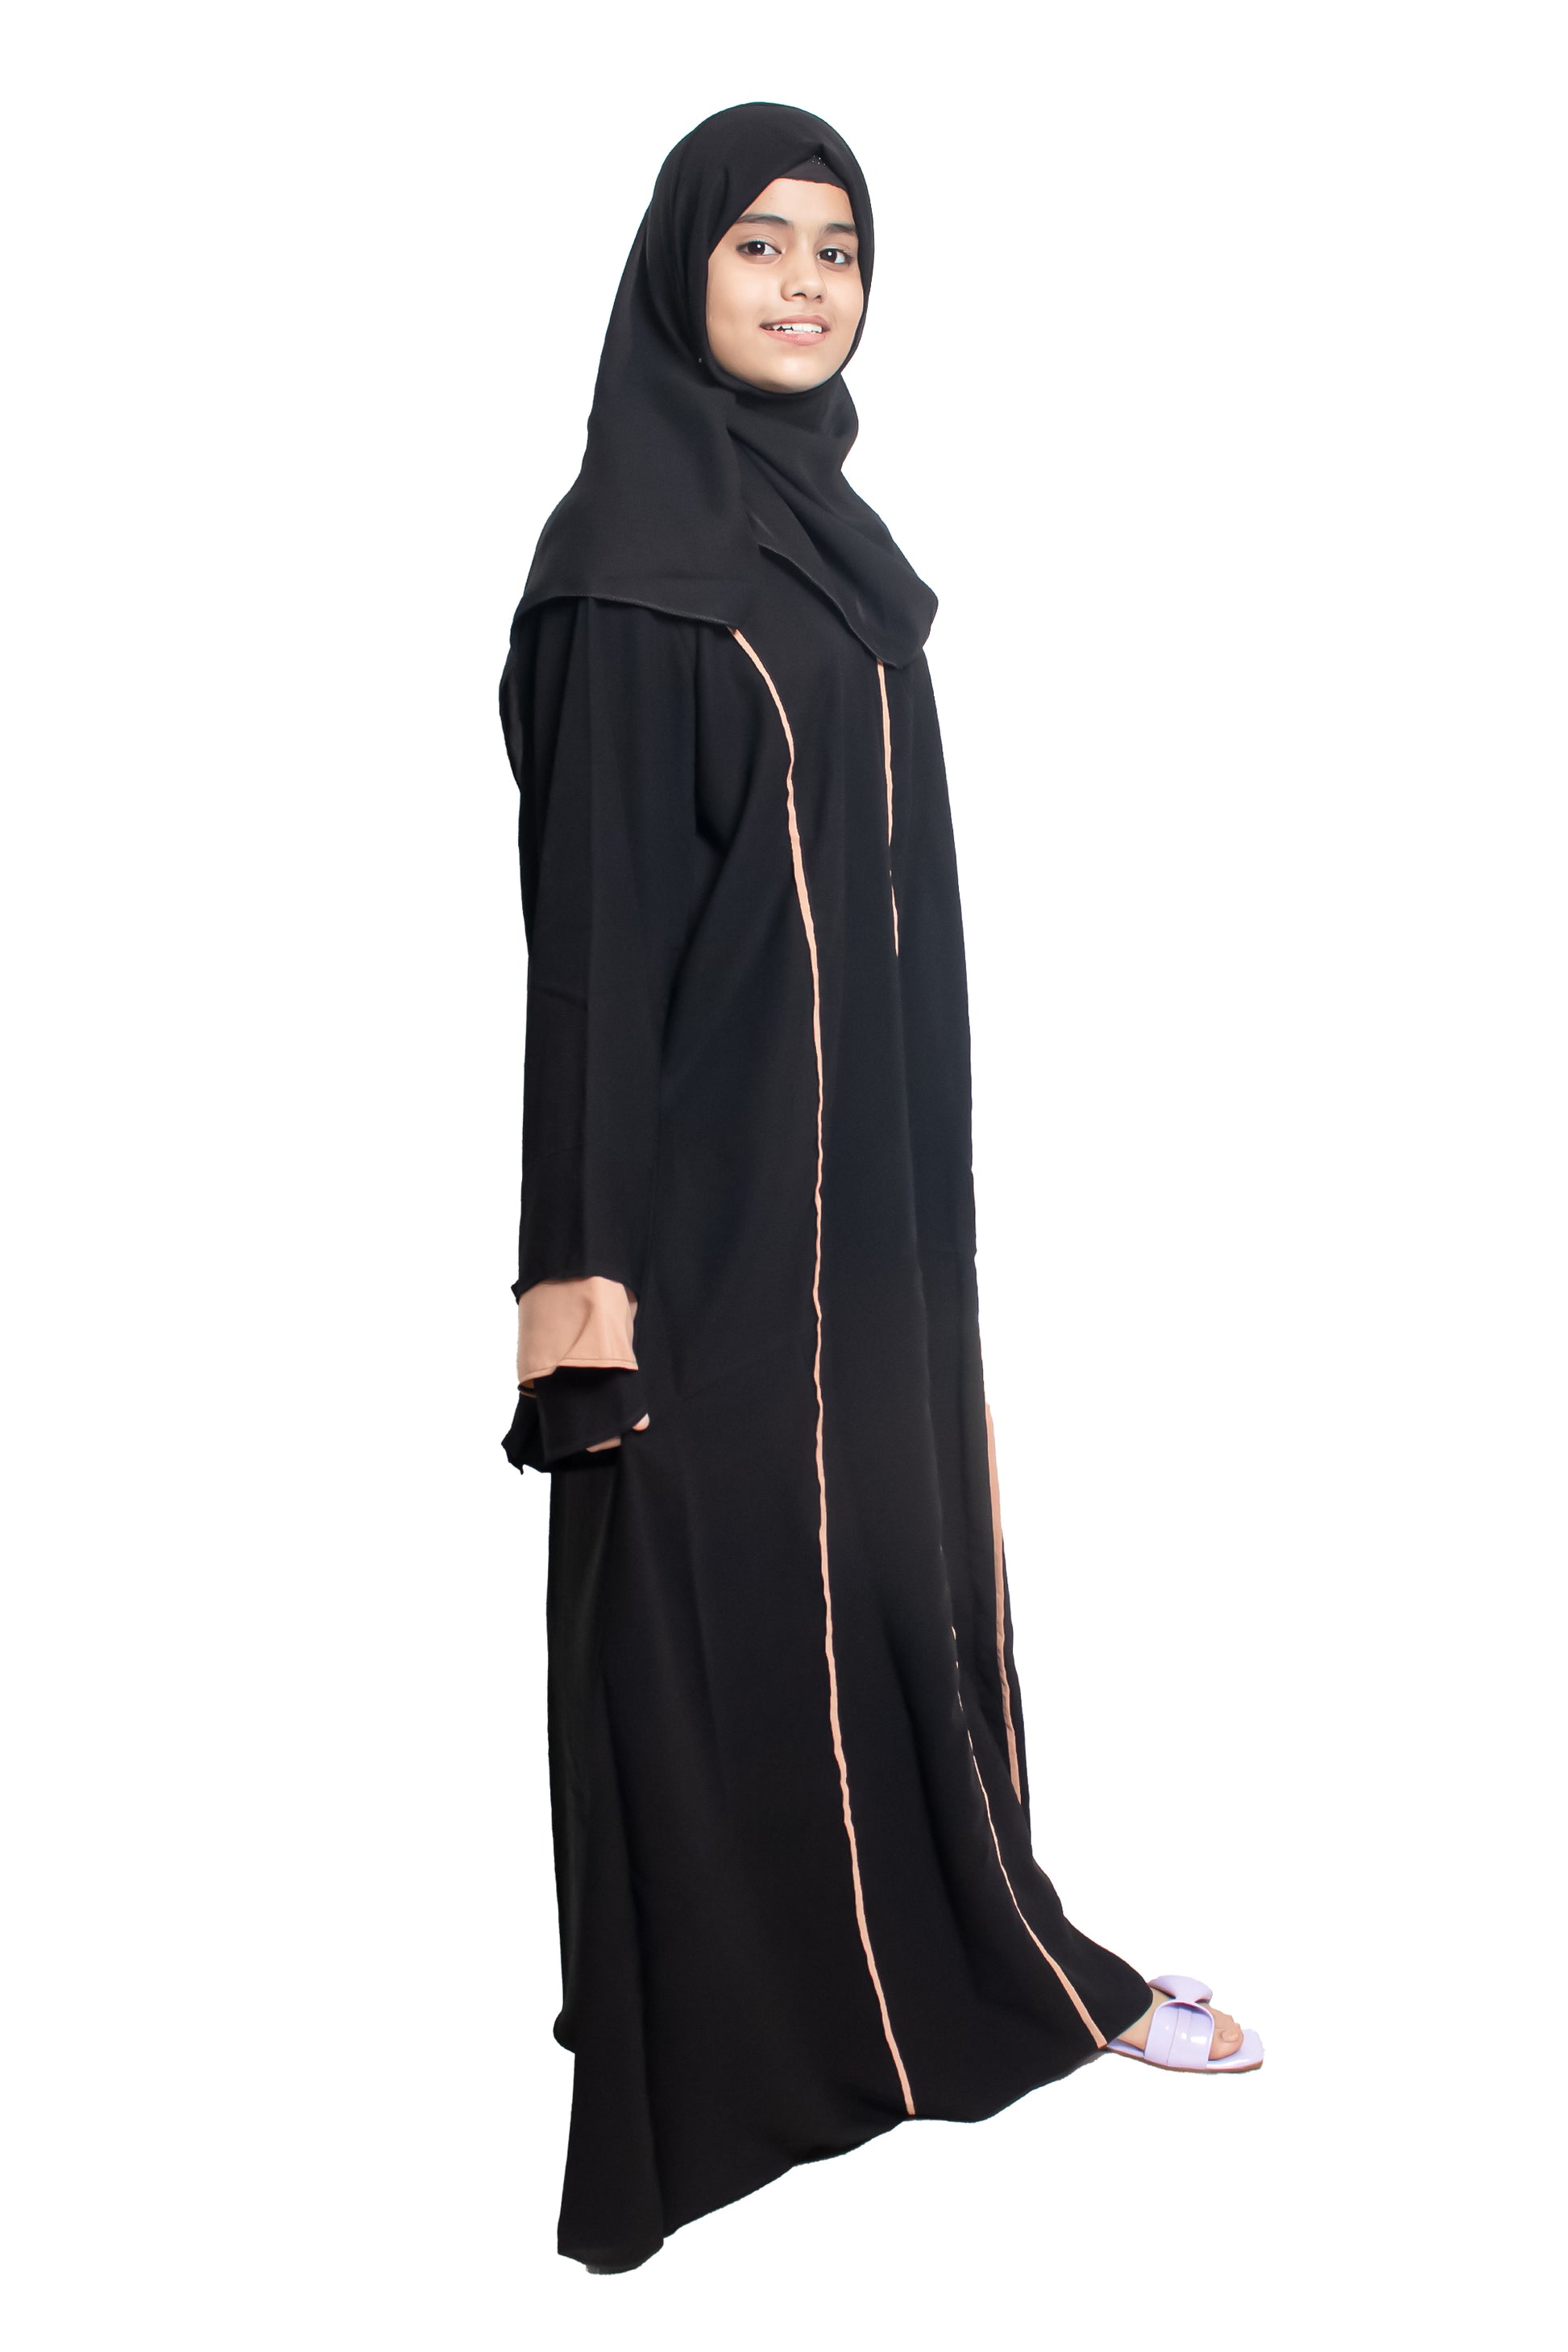 Modest City  Self Design Black Paralllel Stripes Crepe Abaya or Burqa with Hijab for Women & Girls-Series Laiba